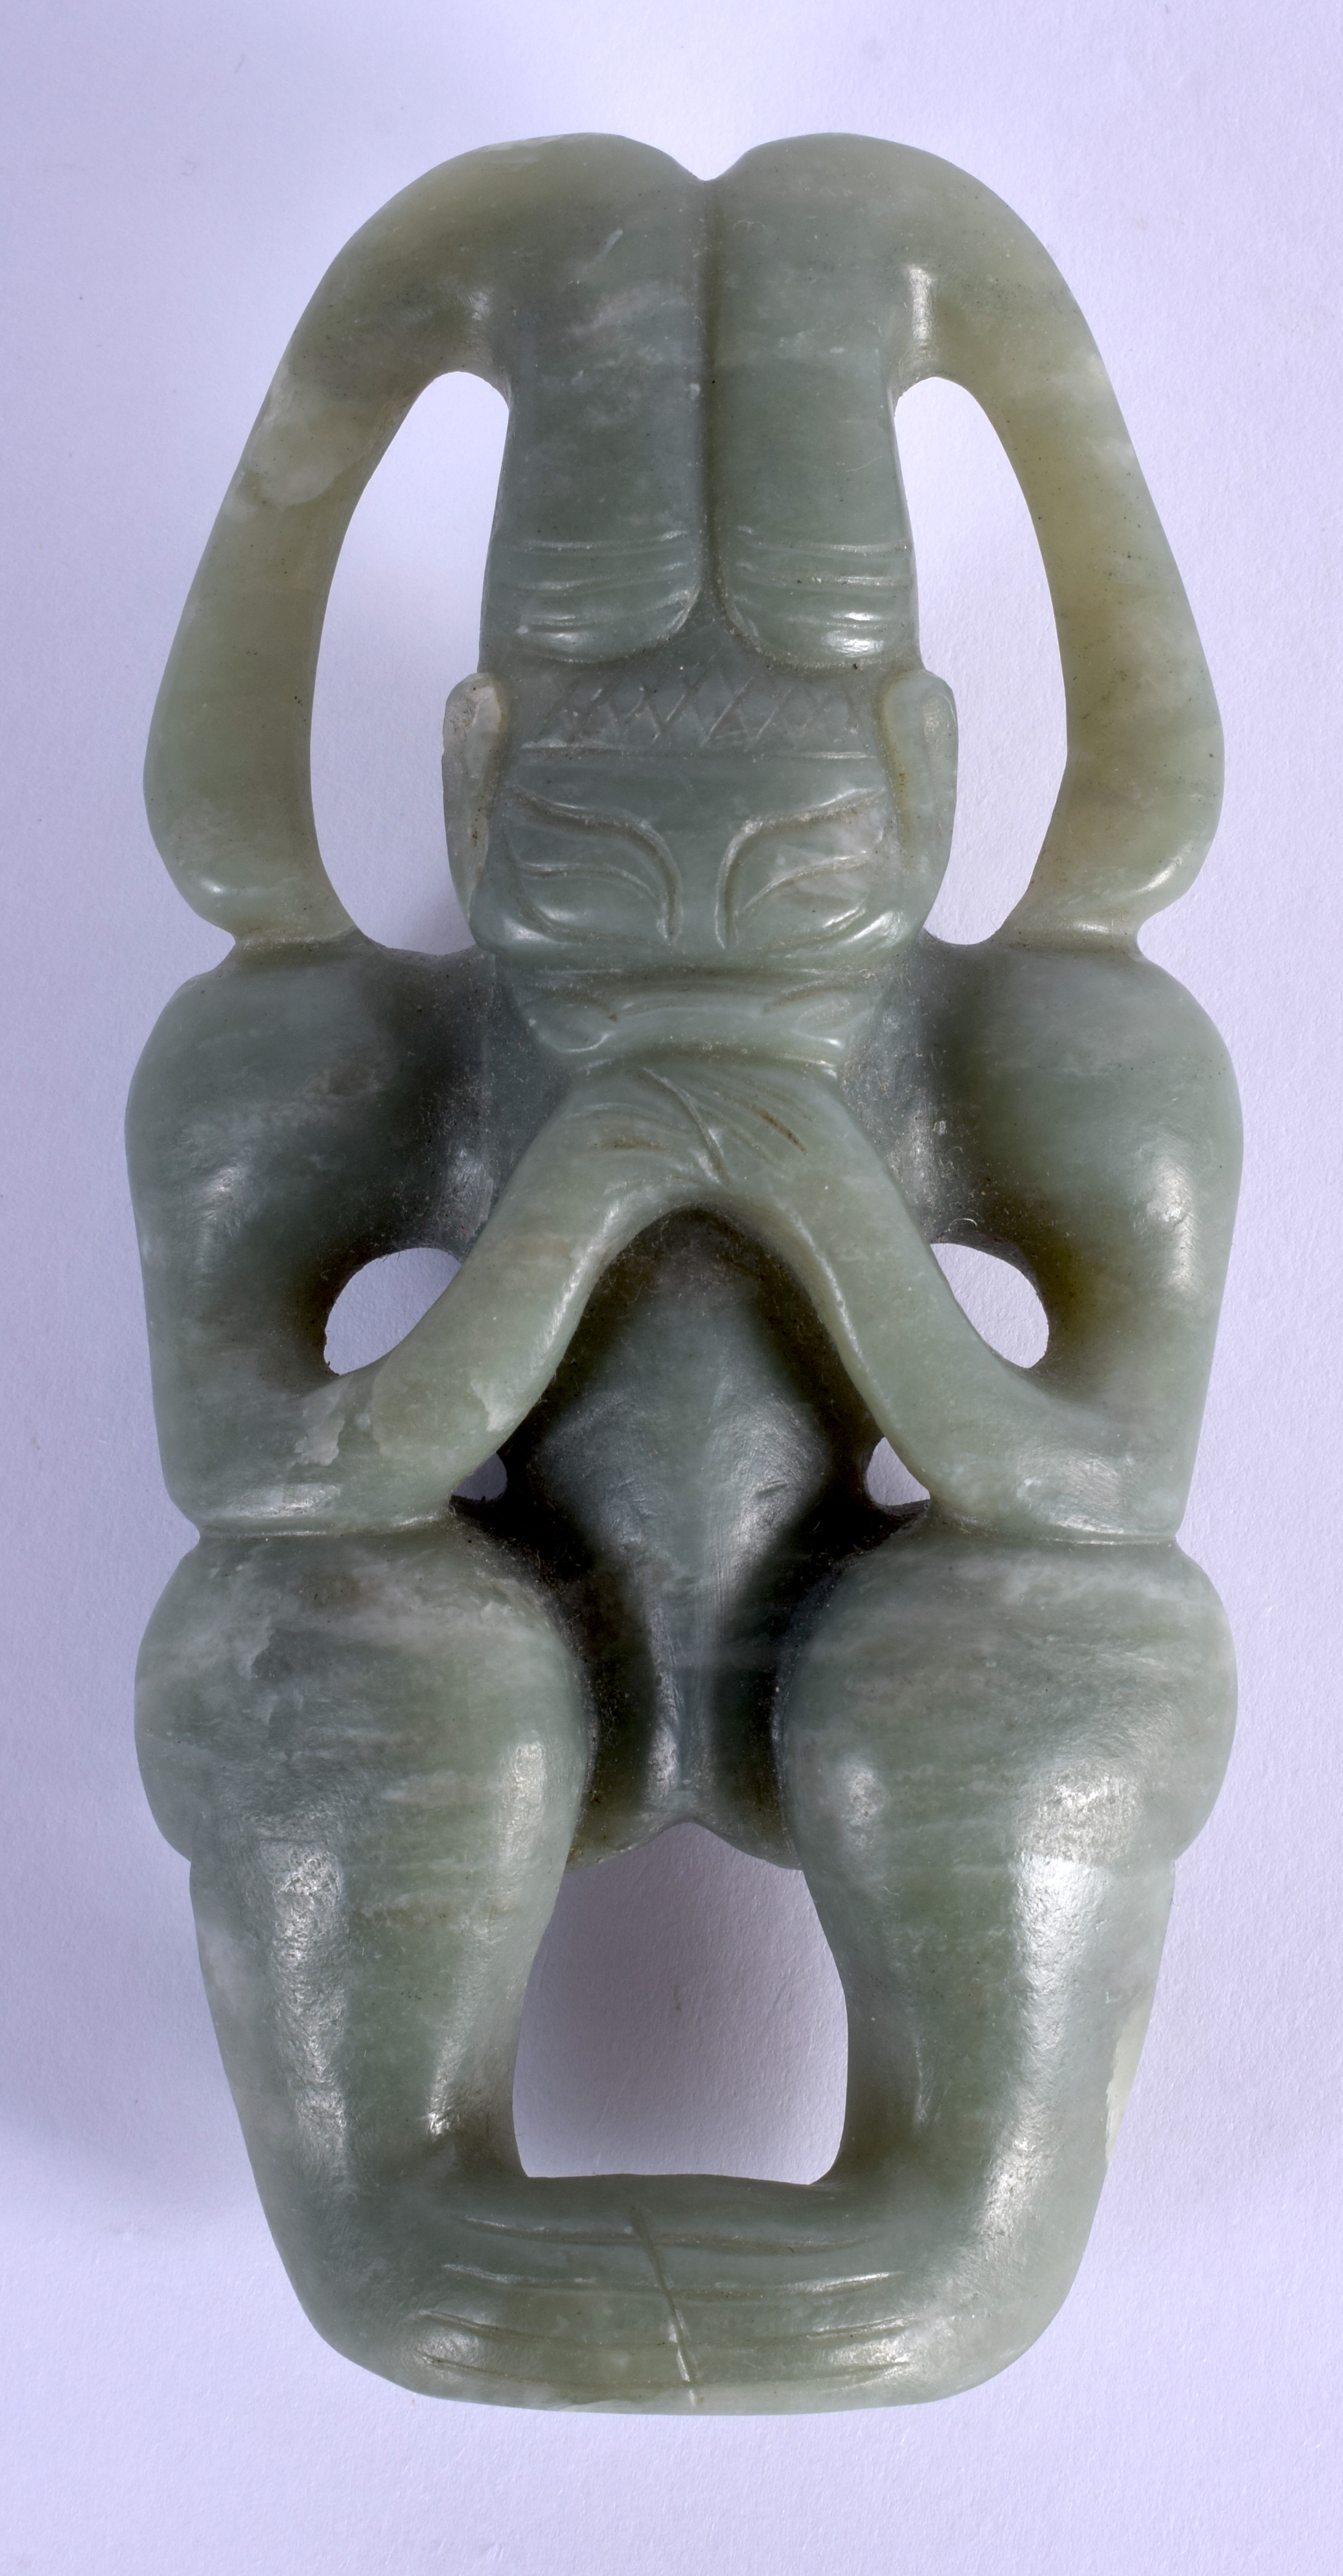 A CHINESE CARVED HONGSHAN CULTURE CARVED JADE FIGURE OF A SUN GOD possibly Neolithic period. 12 cm x